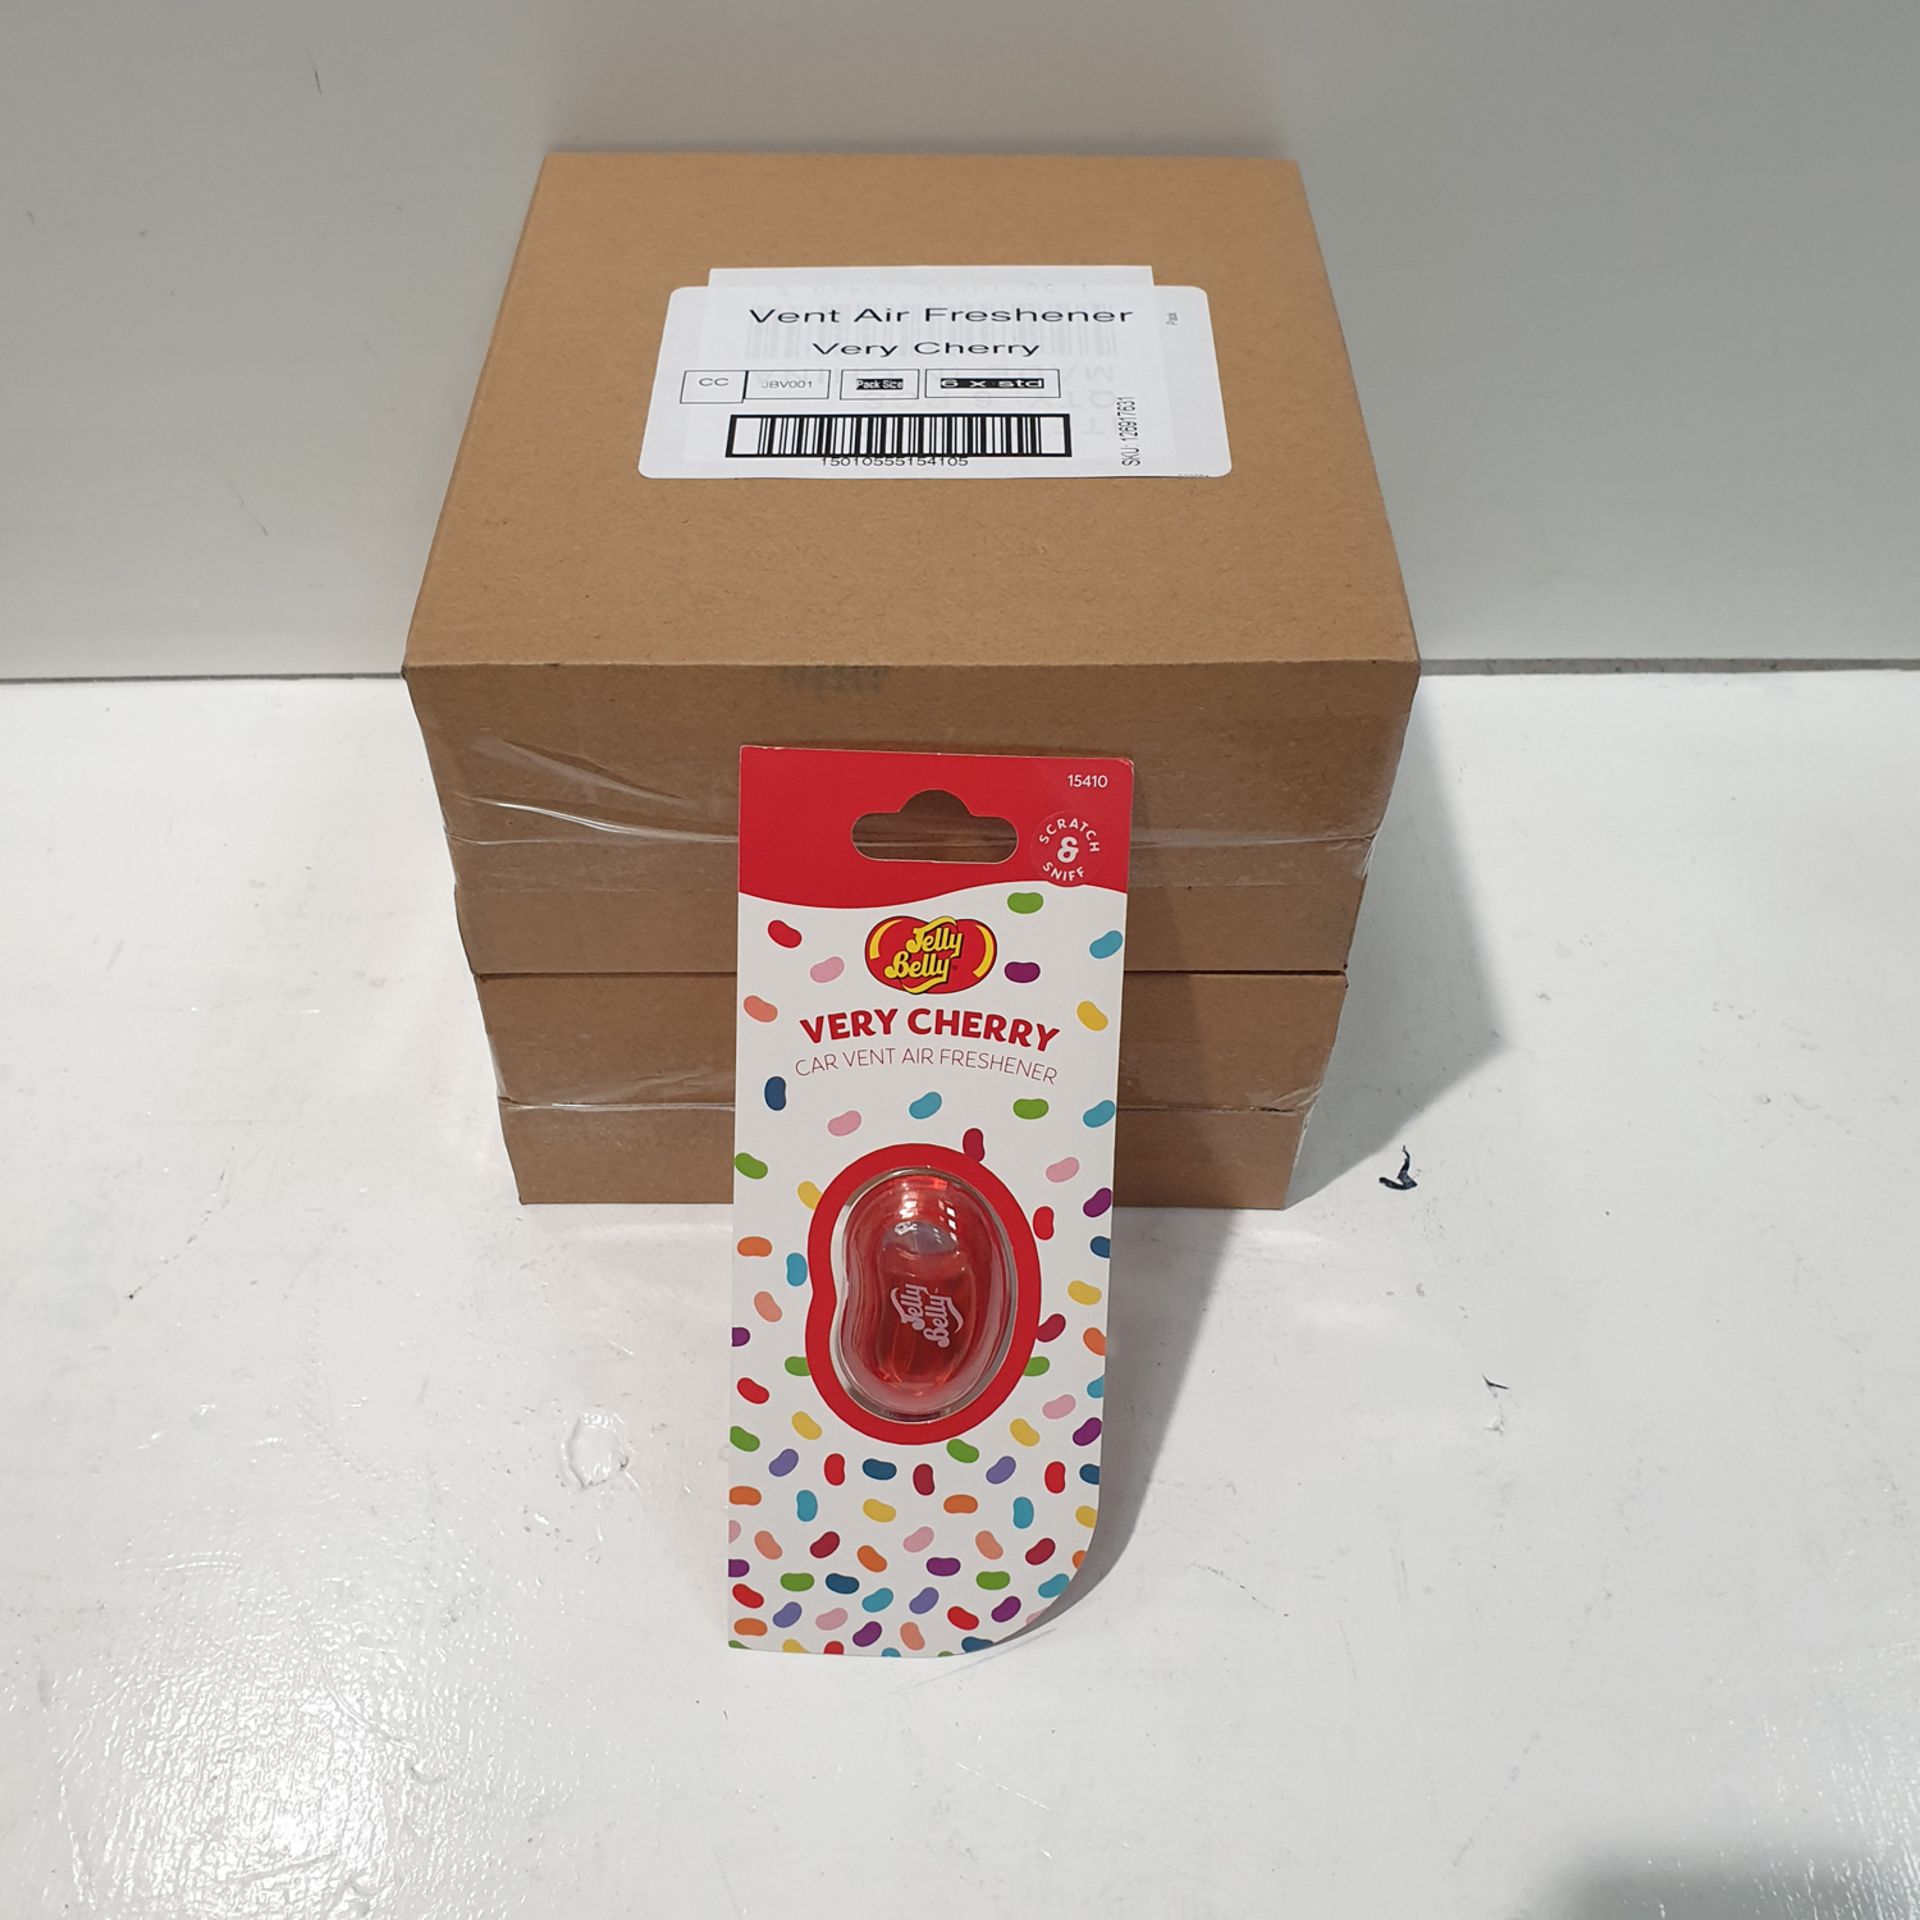 12 x Jelly Belly Car Vent Air Fresheners, Verry Cherry Scent.